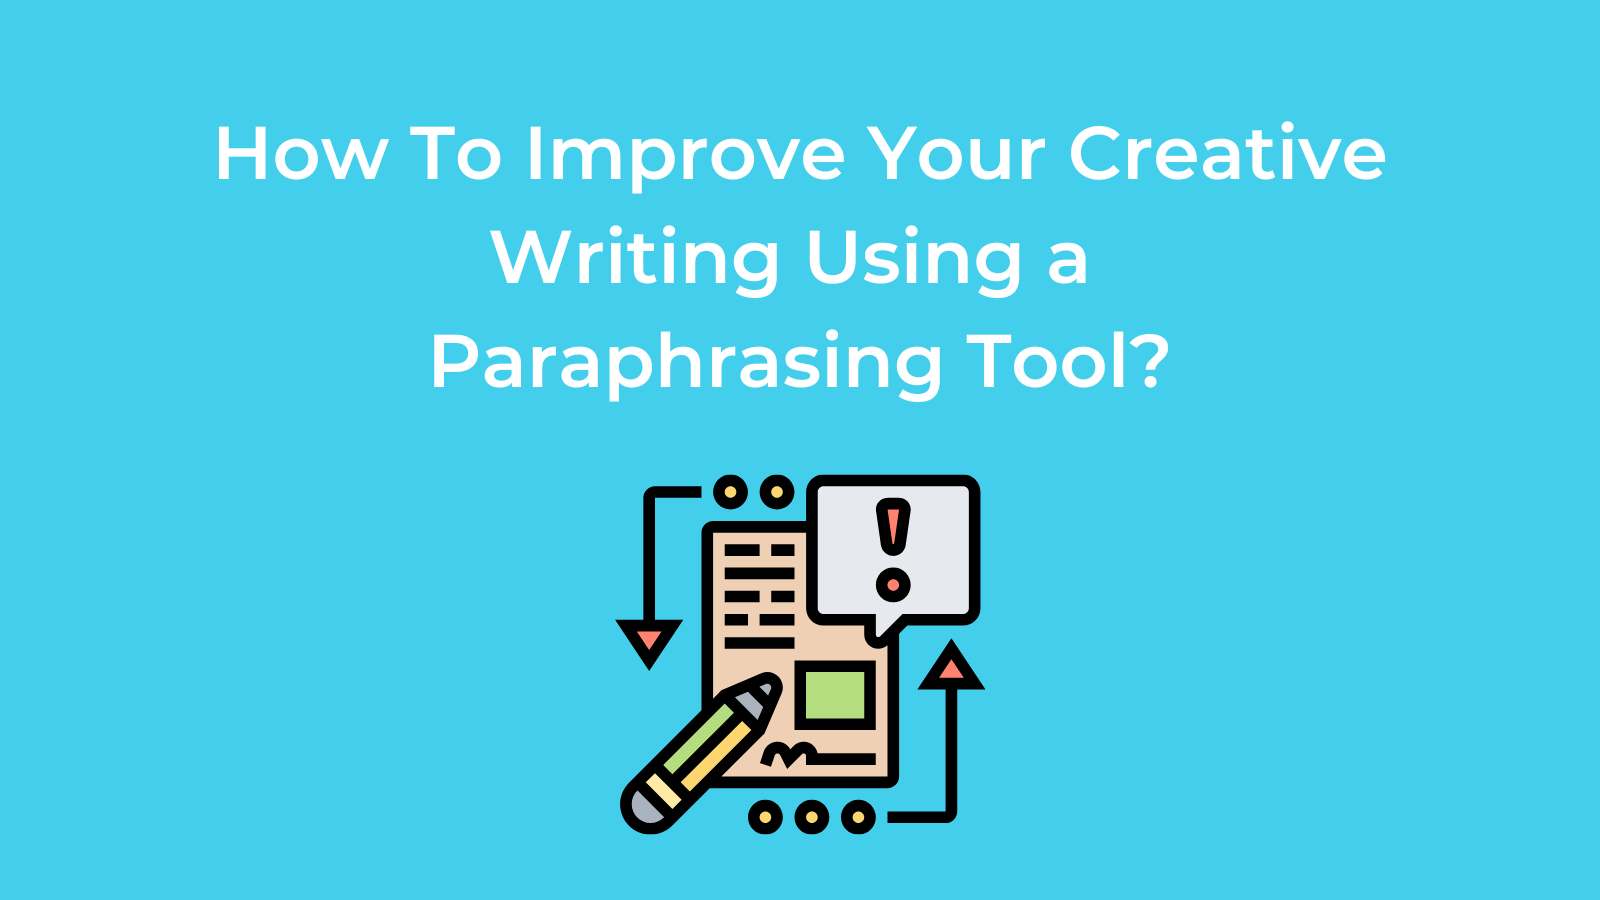 How To Improve Your Creative Writing Using a Paraphrasing Tool